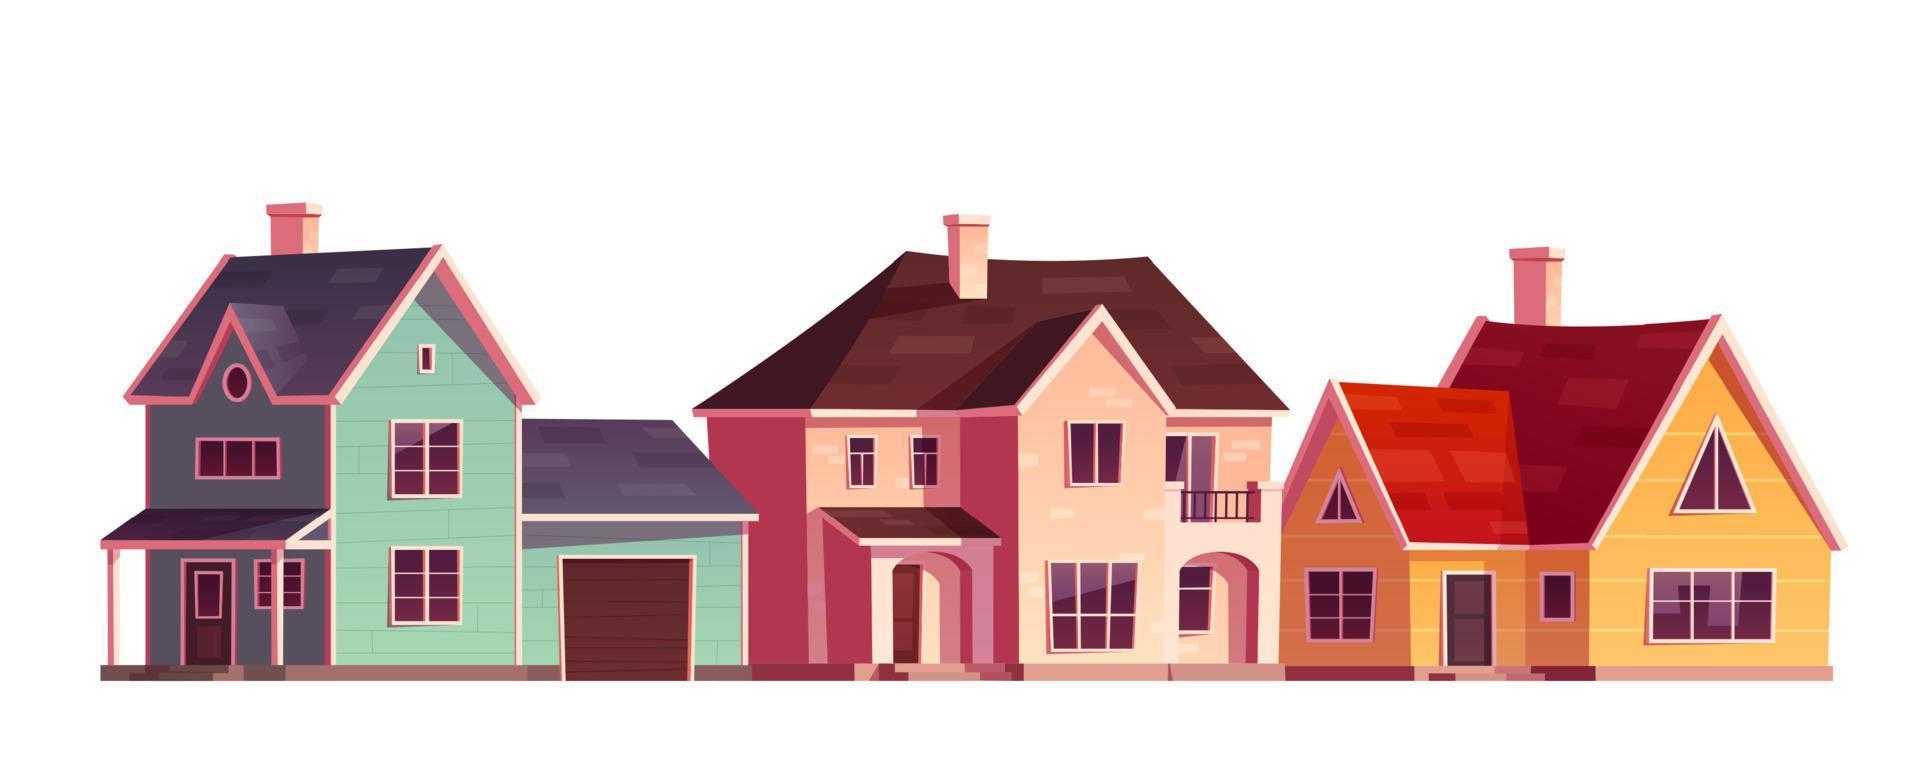 Cartoon set of houses with garages on white vector